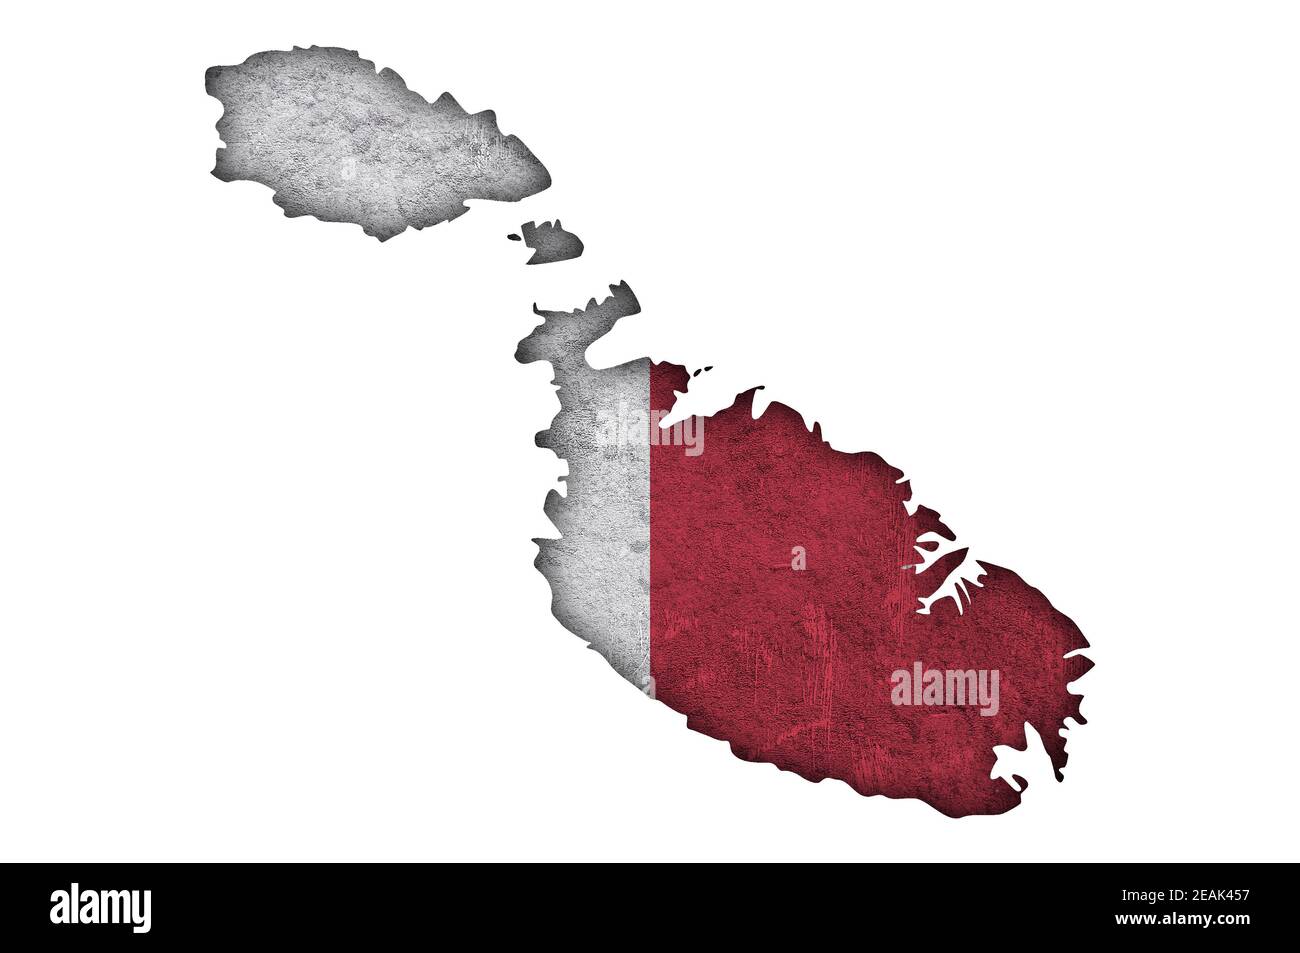 Map and flag of Malta on weathered concrete Stock Photo